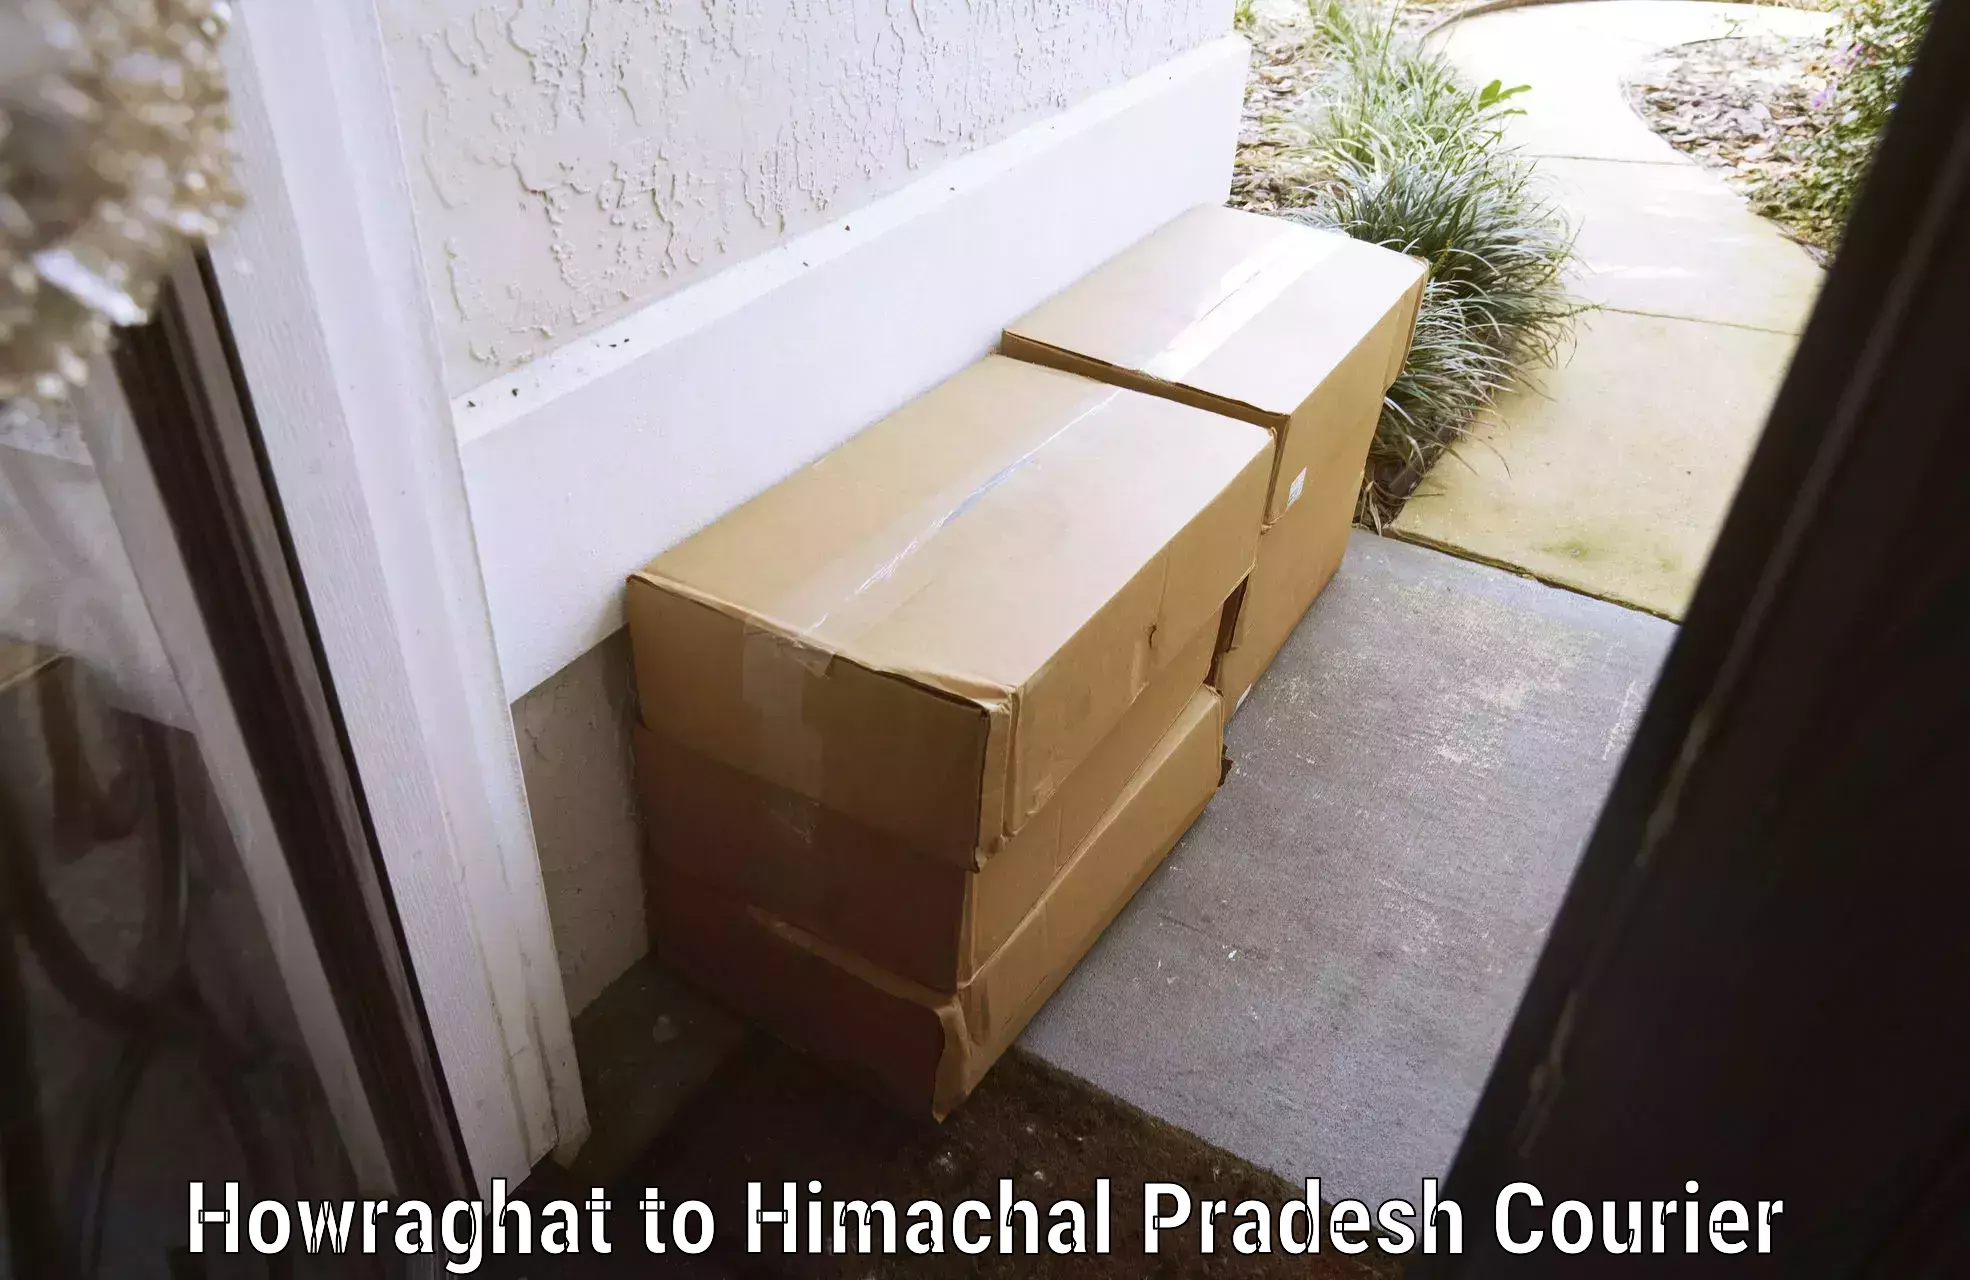 Baggage relocation service Howraghat to Himachal Pradesh